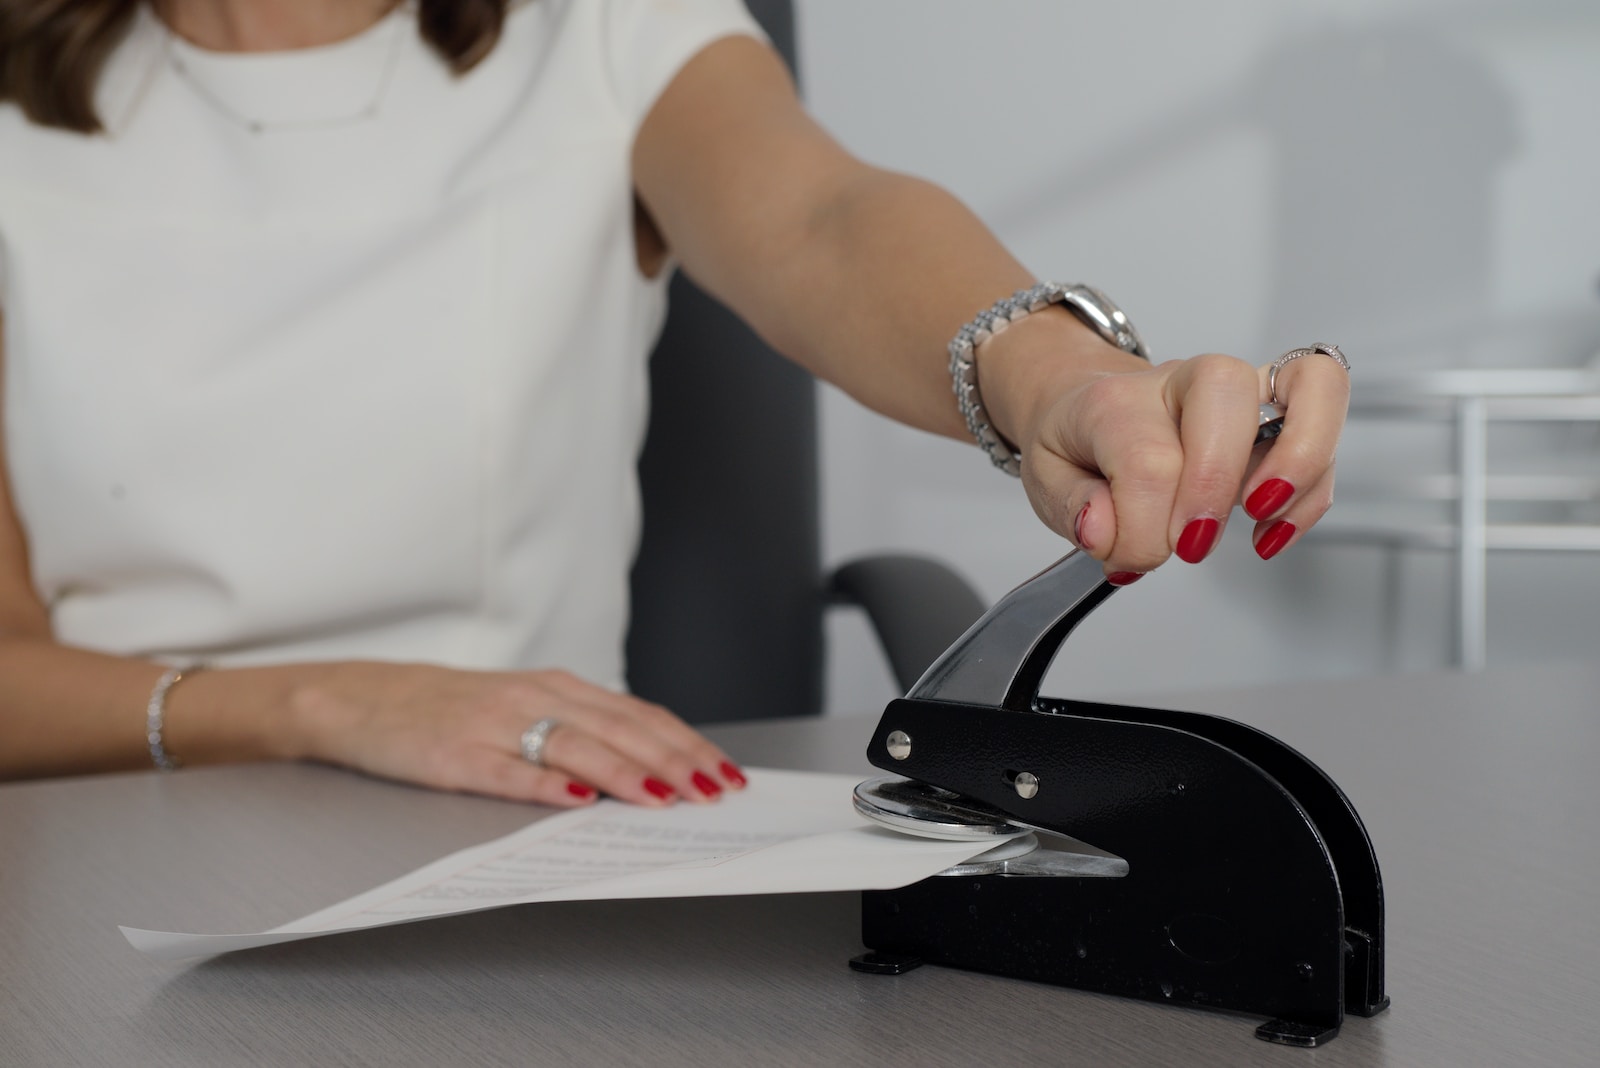 An In-depth Guide on UPS Notary Services and Costs